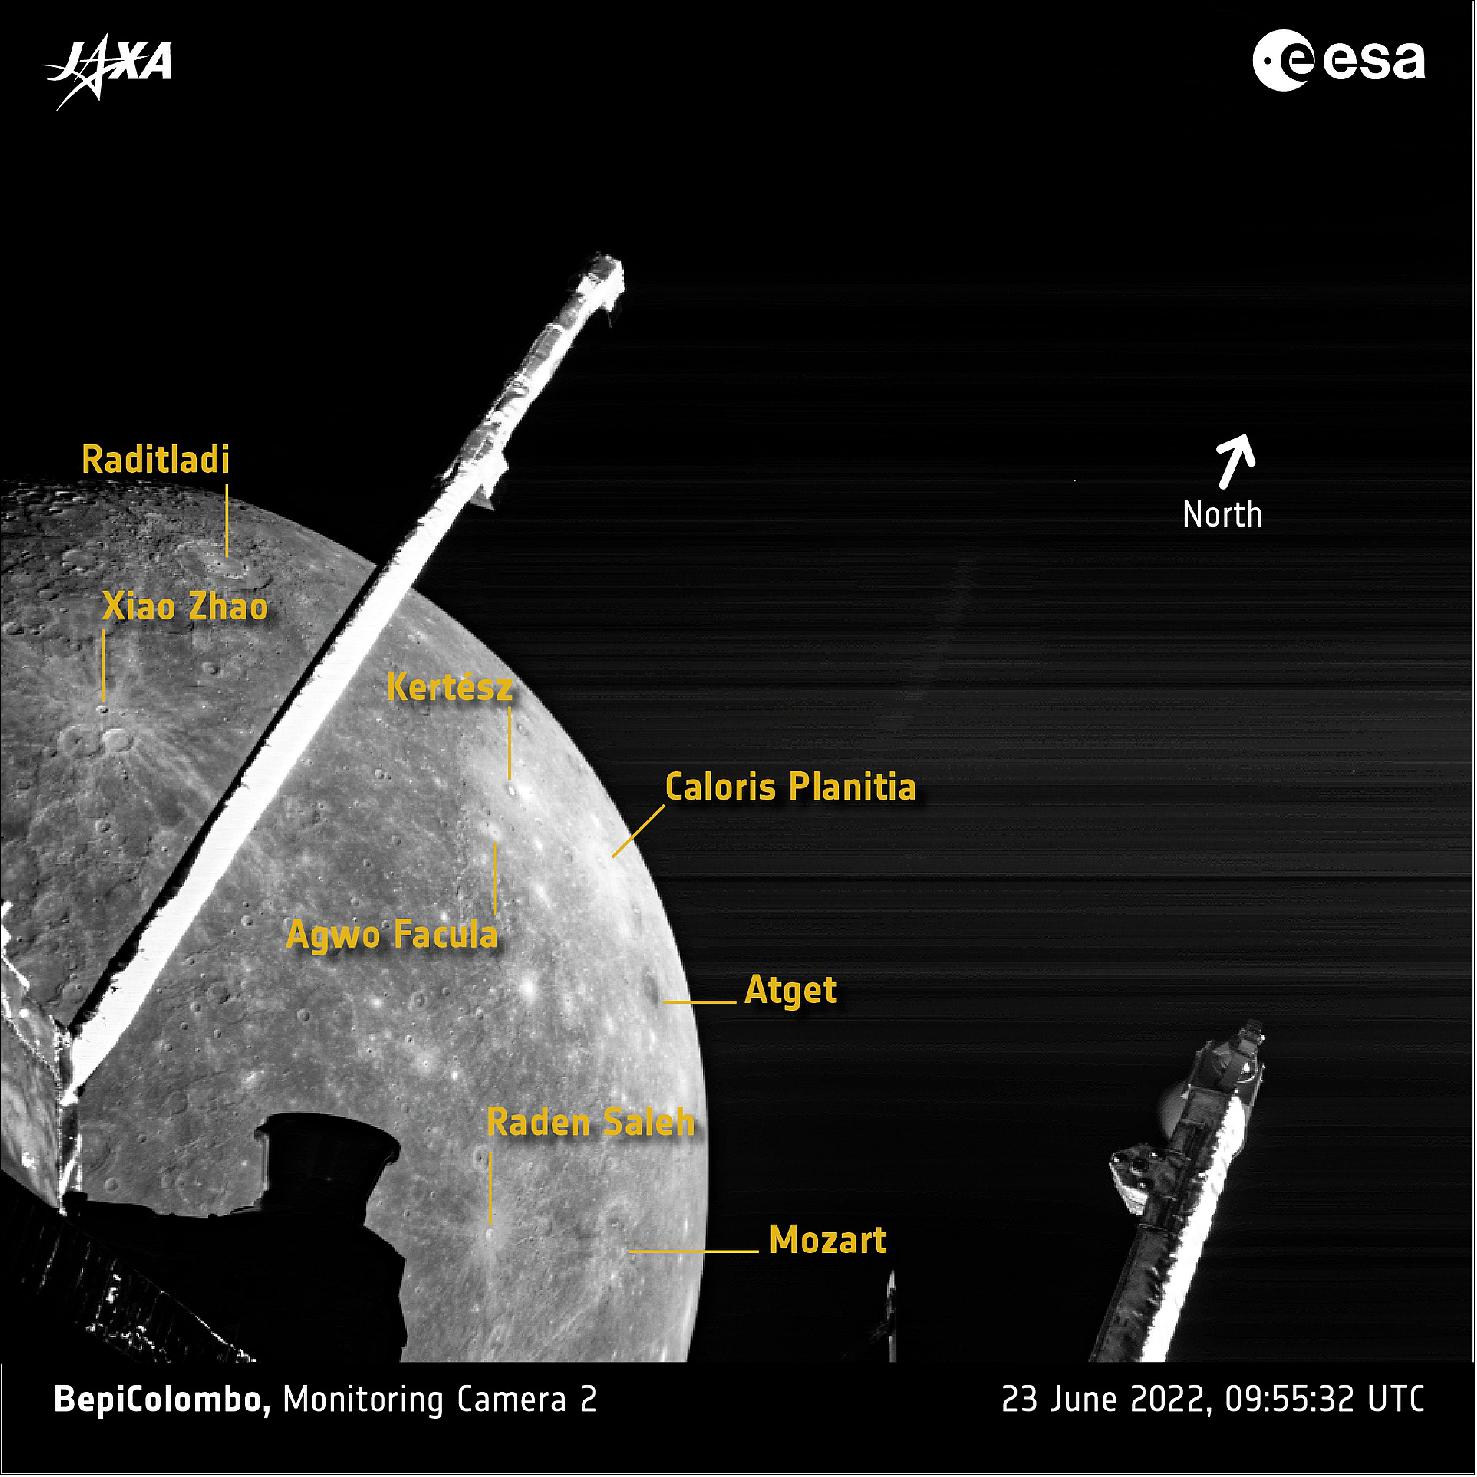 Figure 19: First sighting of Caloris (annotated). The joint European-Japanese BepiColombo mission captured this view of Mercury on 23 June 2023 as the spacecraft flew past the planet for its second of six gravity assist manoeuvres at Mercury. This image was taken at 09:55:32 UTC by the Mercury Transfer Module's Monitoring Camera 2, when the spacecraft was 2862 km from the surface of Mercury. Closest approach of 200 km took place shortly before, at 09:44 UTC. In this view, north is approximately towards the top right.